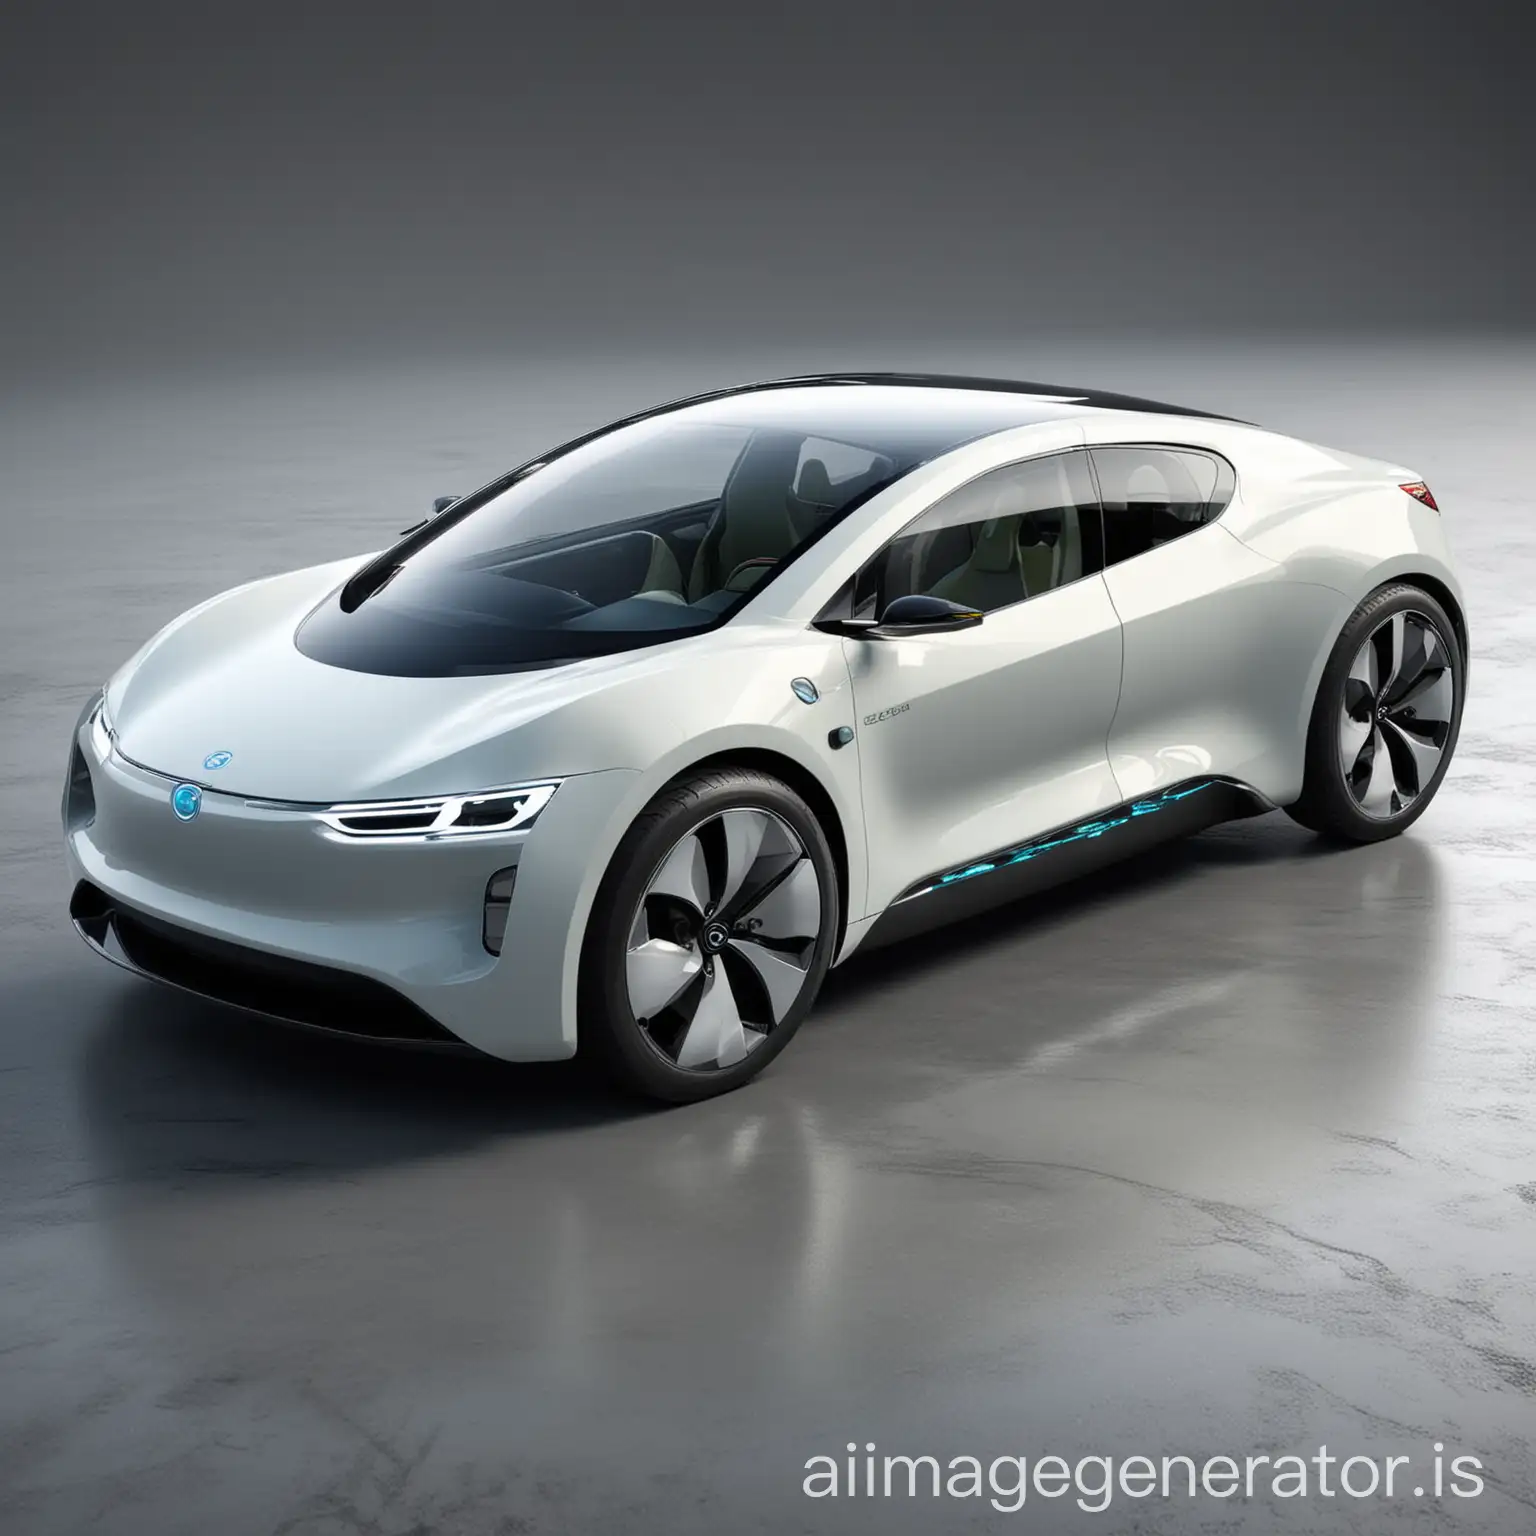 Generate an image of an eco-friendly electric car with a sleek, futuristic design, emphasizing advanced technology and innovation. The car should have a clean and aerodynamic shape, with subtle branding that suggests cutting-edge engineering. Focus on highlighting the vehicle's electric powertrain and environmental benefits.